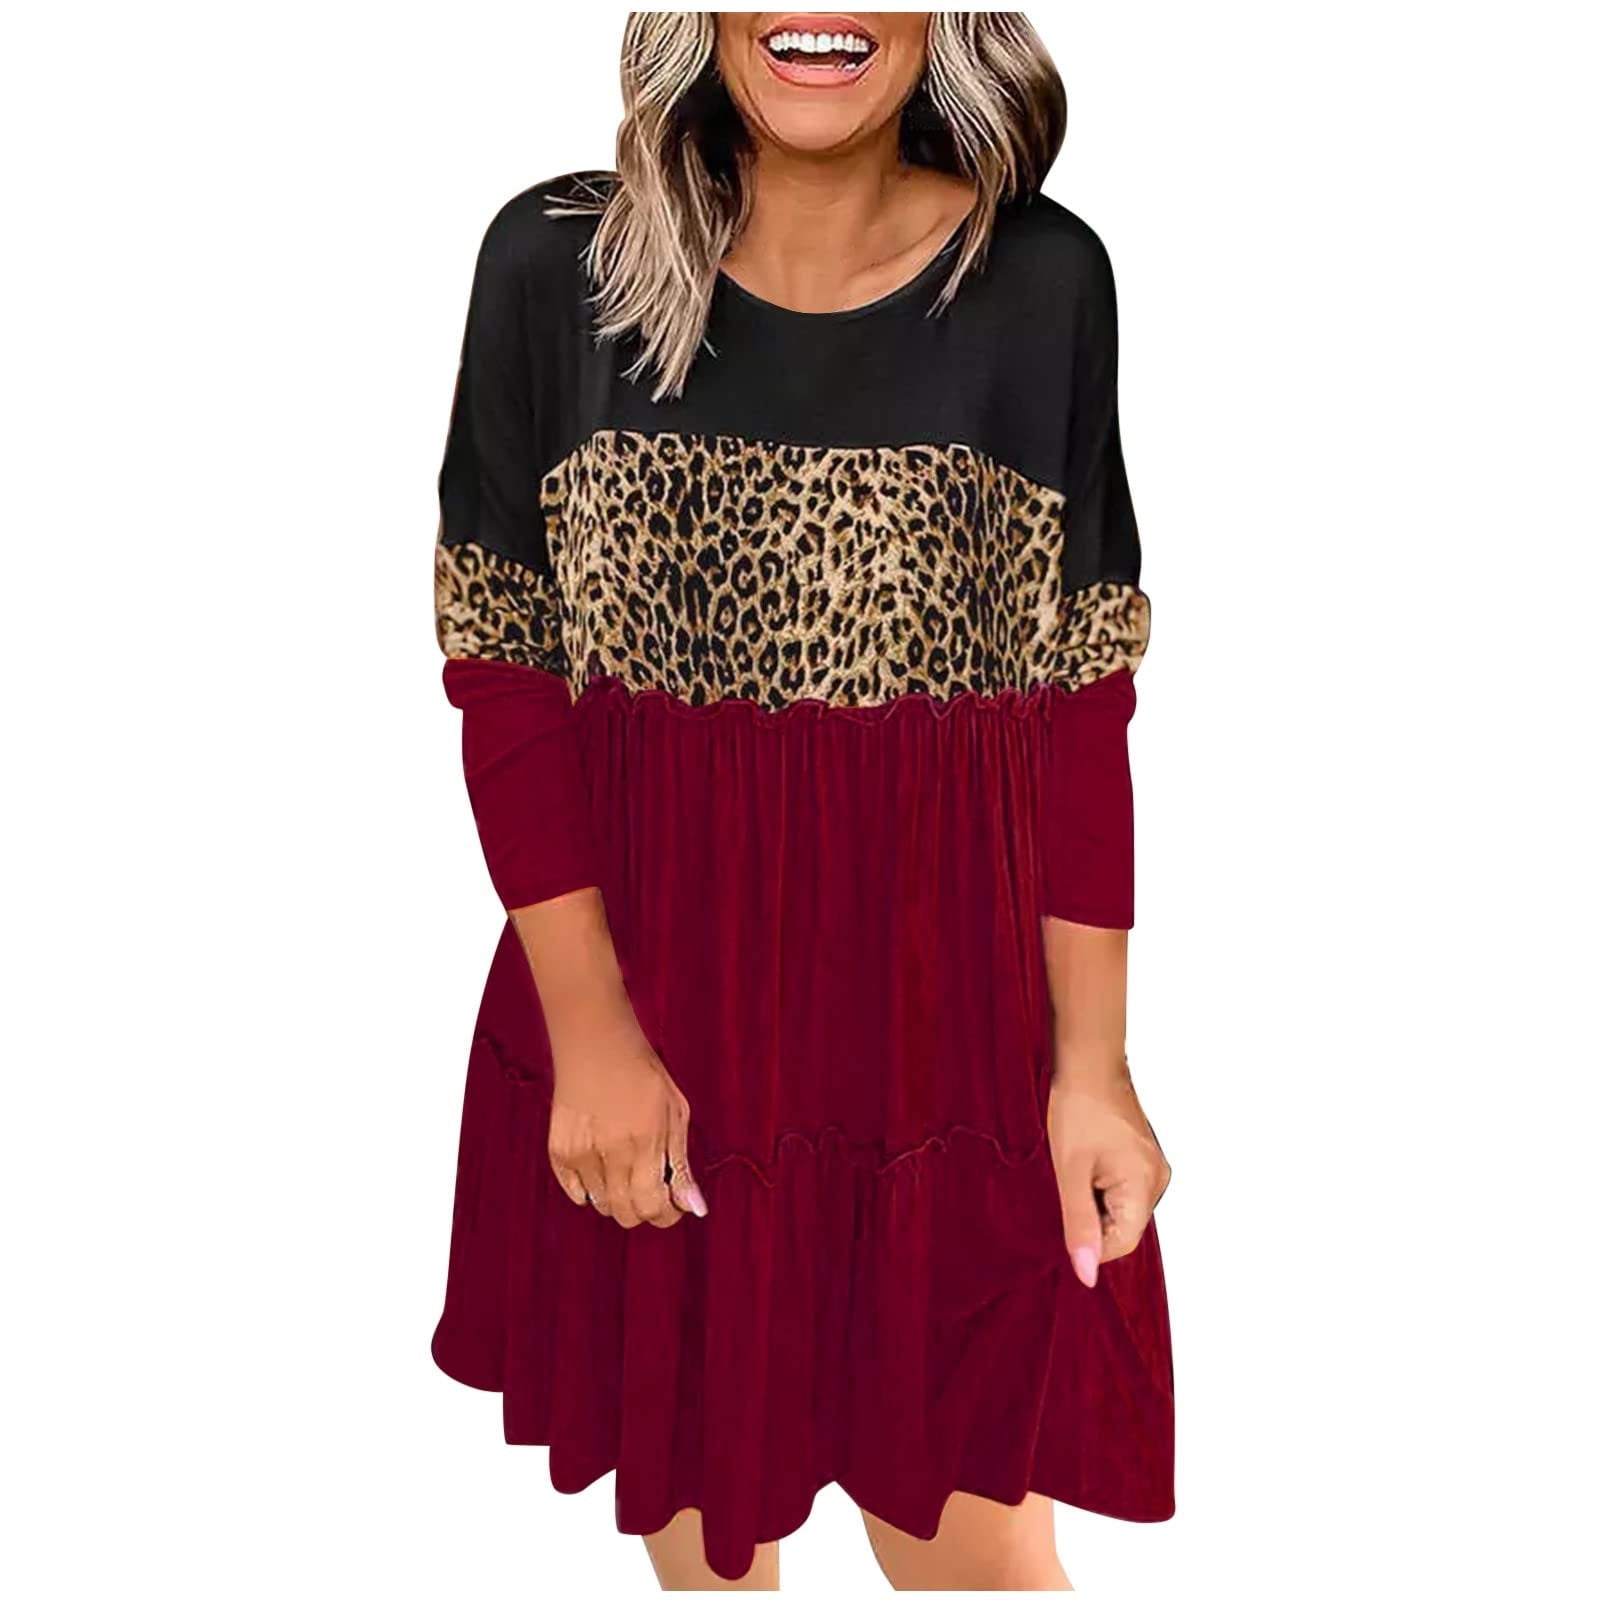 Shmily Girl Womens Long Sleeve Leopard Color Block Casual Dress with Pockets Knee Length Loose Fit